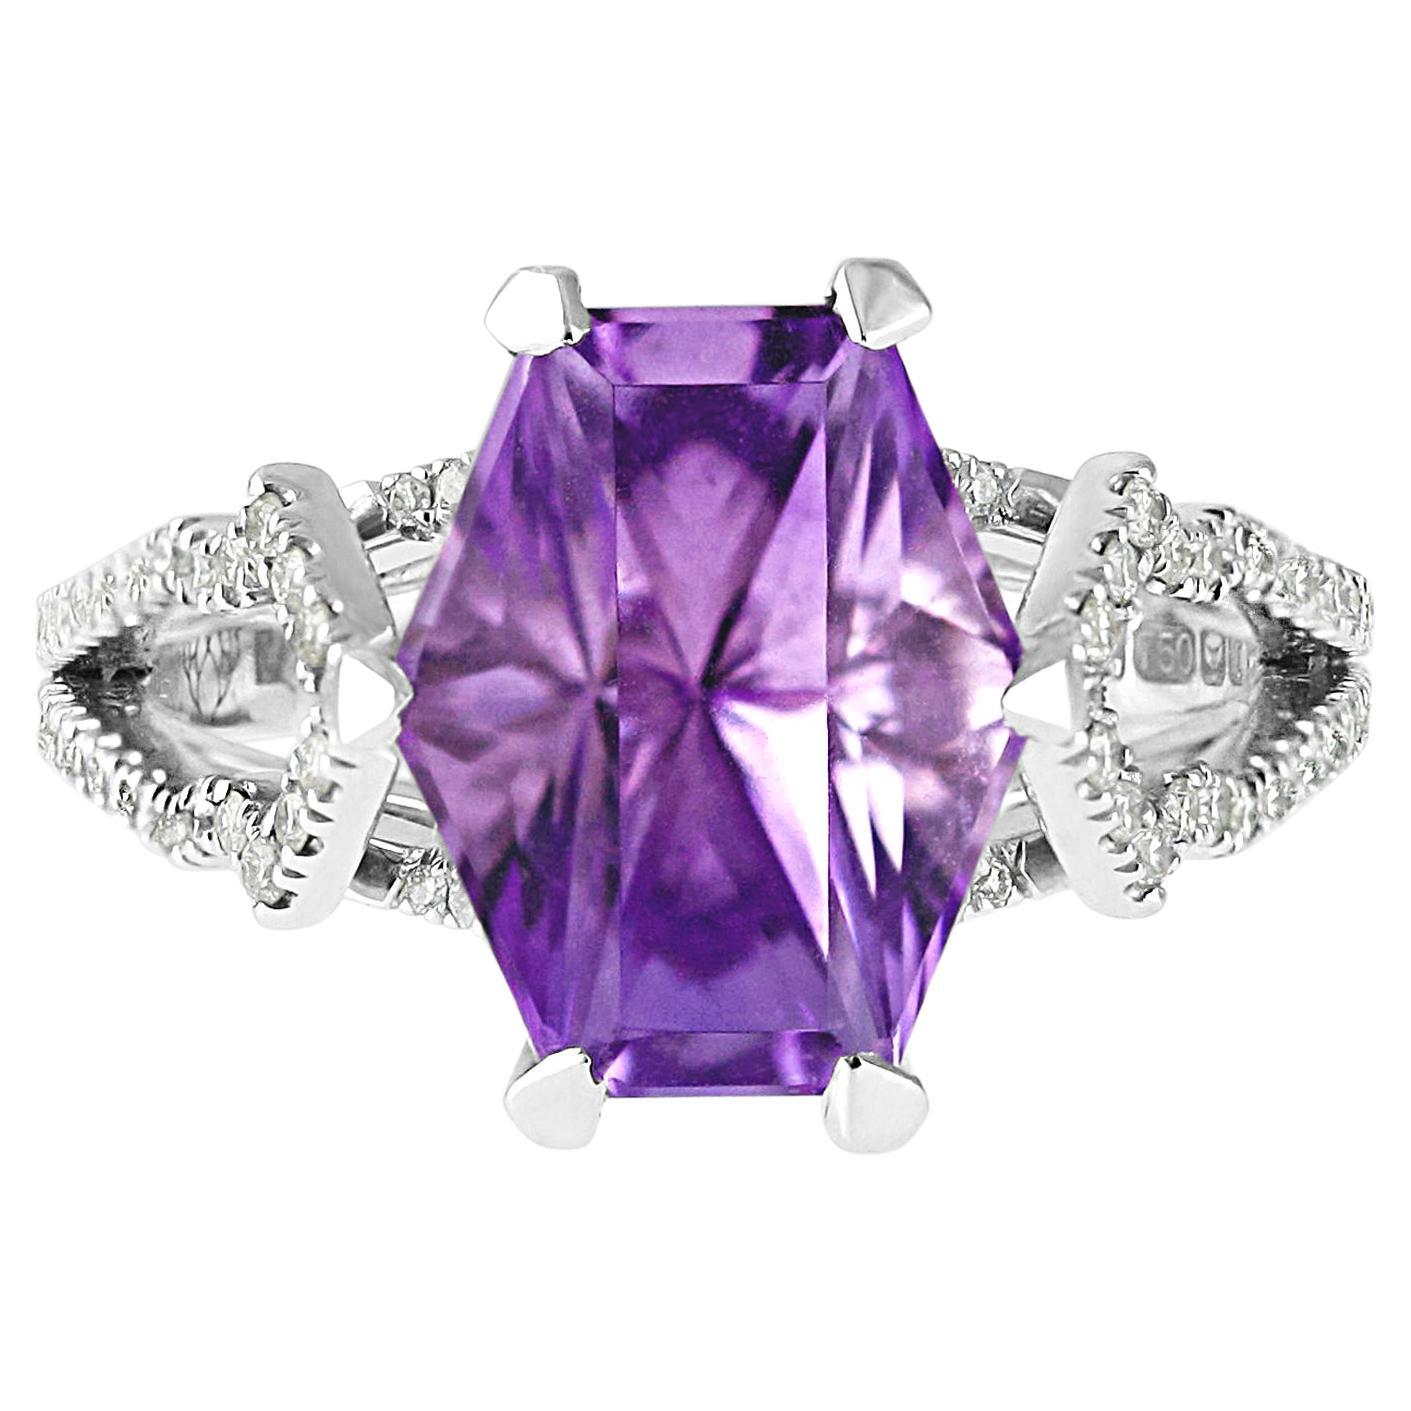 Kata Asteria Ring Bespoke 2.78Carat Amethyst with Diamonds Cocktail Fashion Ring For Sale